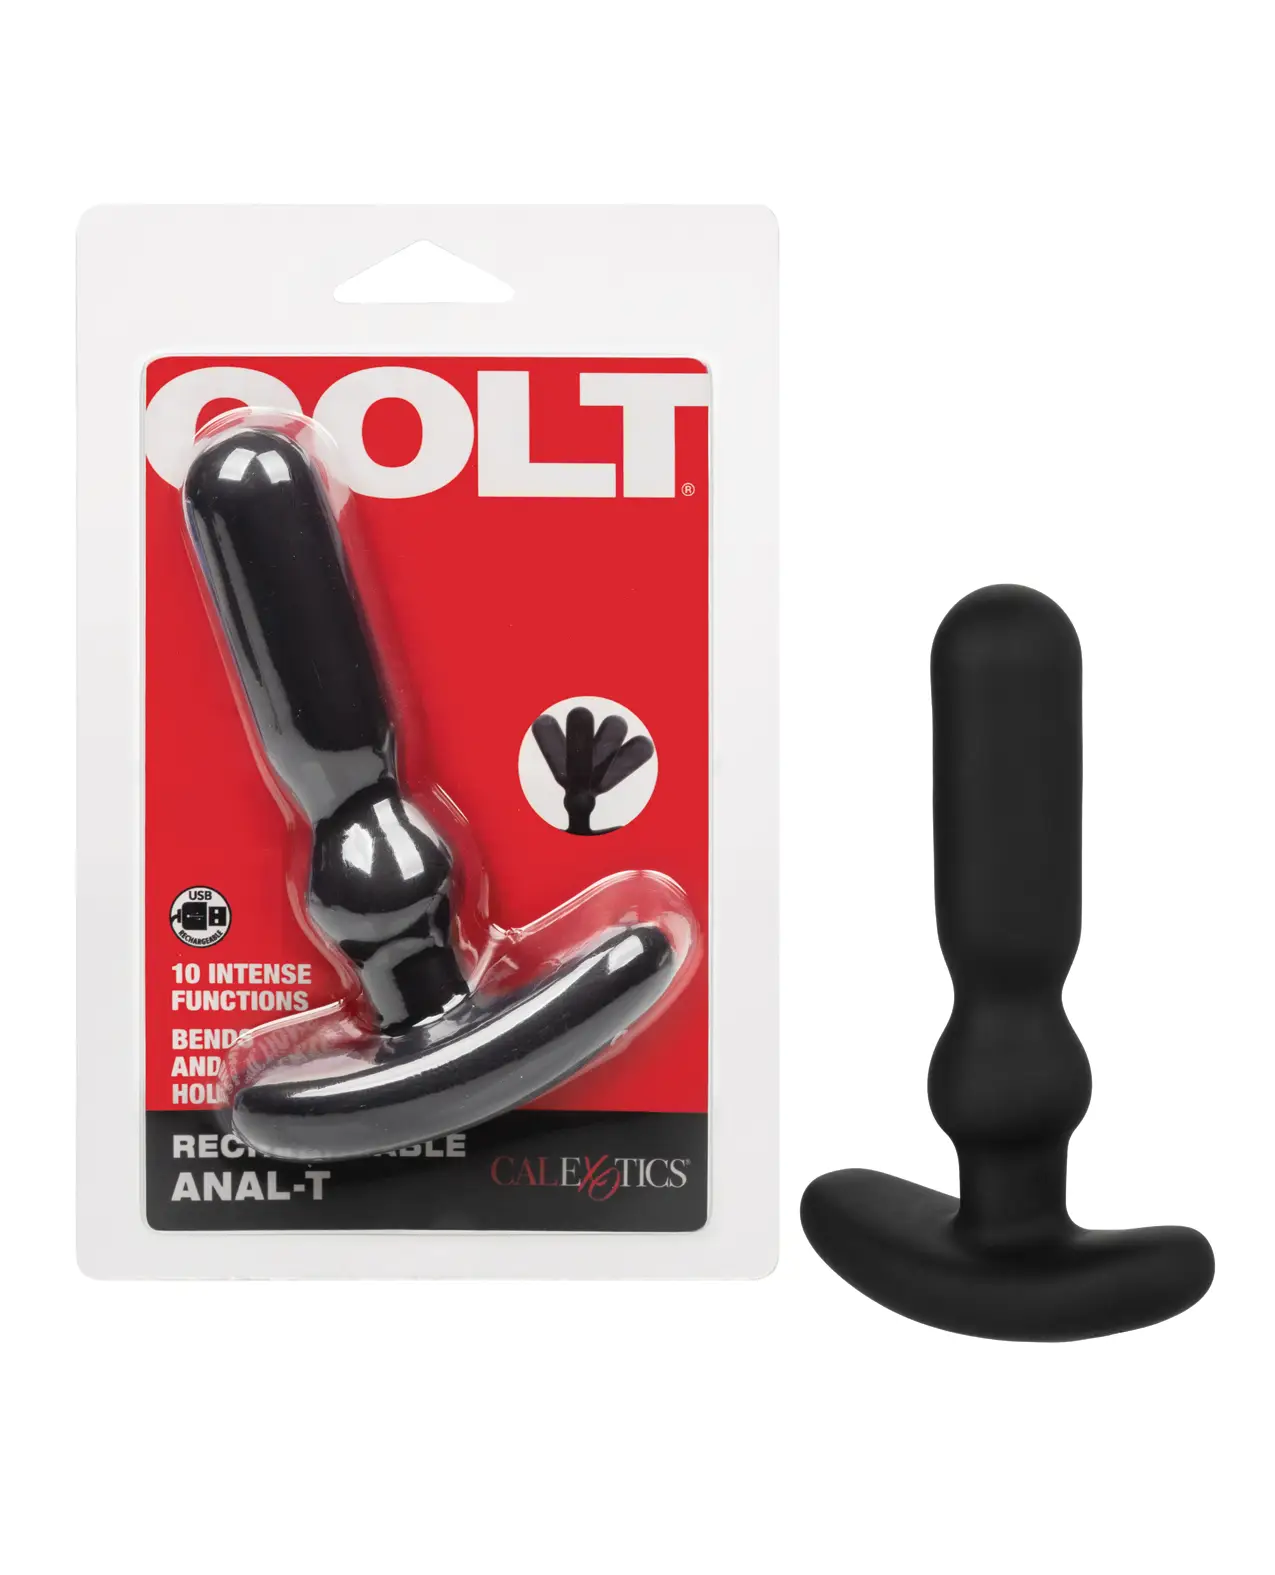 Clamshell packing in red and black with the legendary COLT logo in bold white across the top. The toy sits visible inside and also outside the package on the side. The toy is a vibrating anal probe.